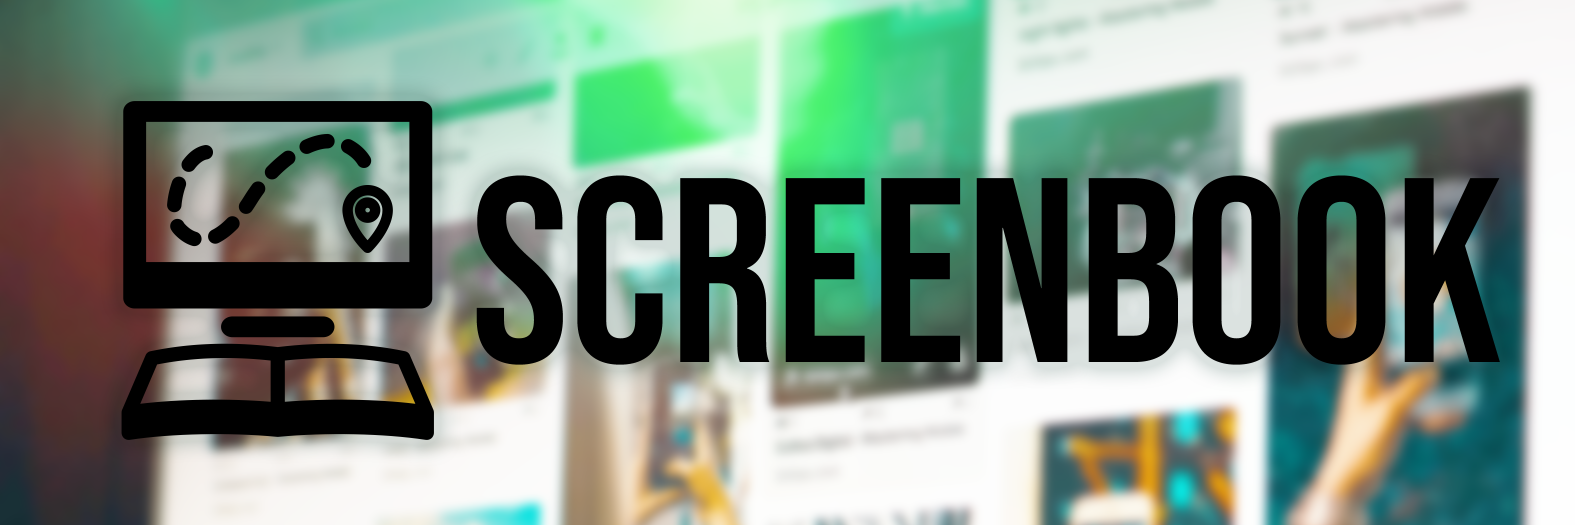 ScreenBook web extension logo overlaid on top of a blurred picture of a web page